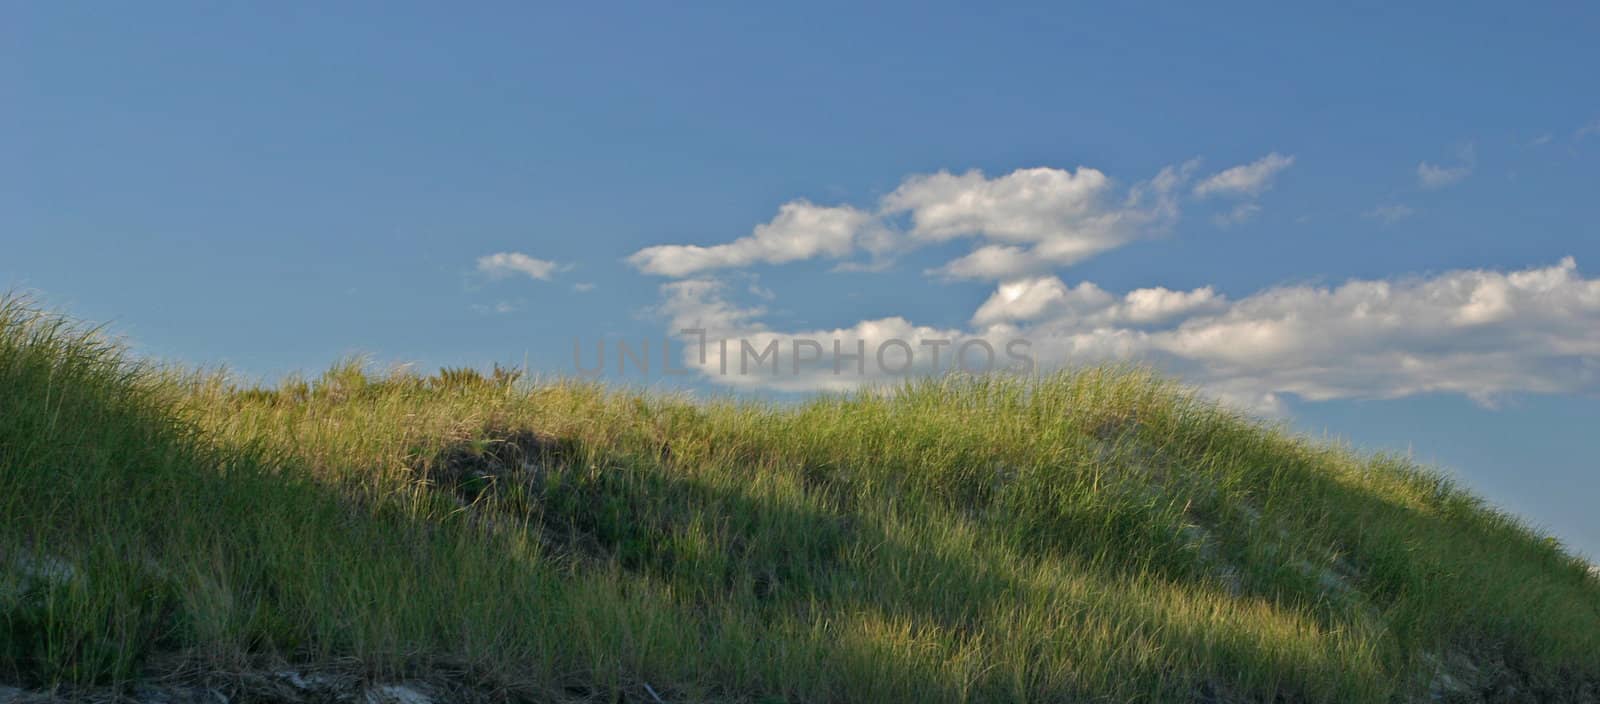 Sea grass growing on sand dunes with clouds in background